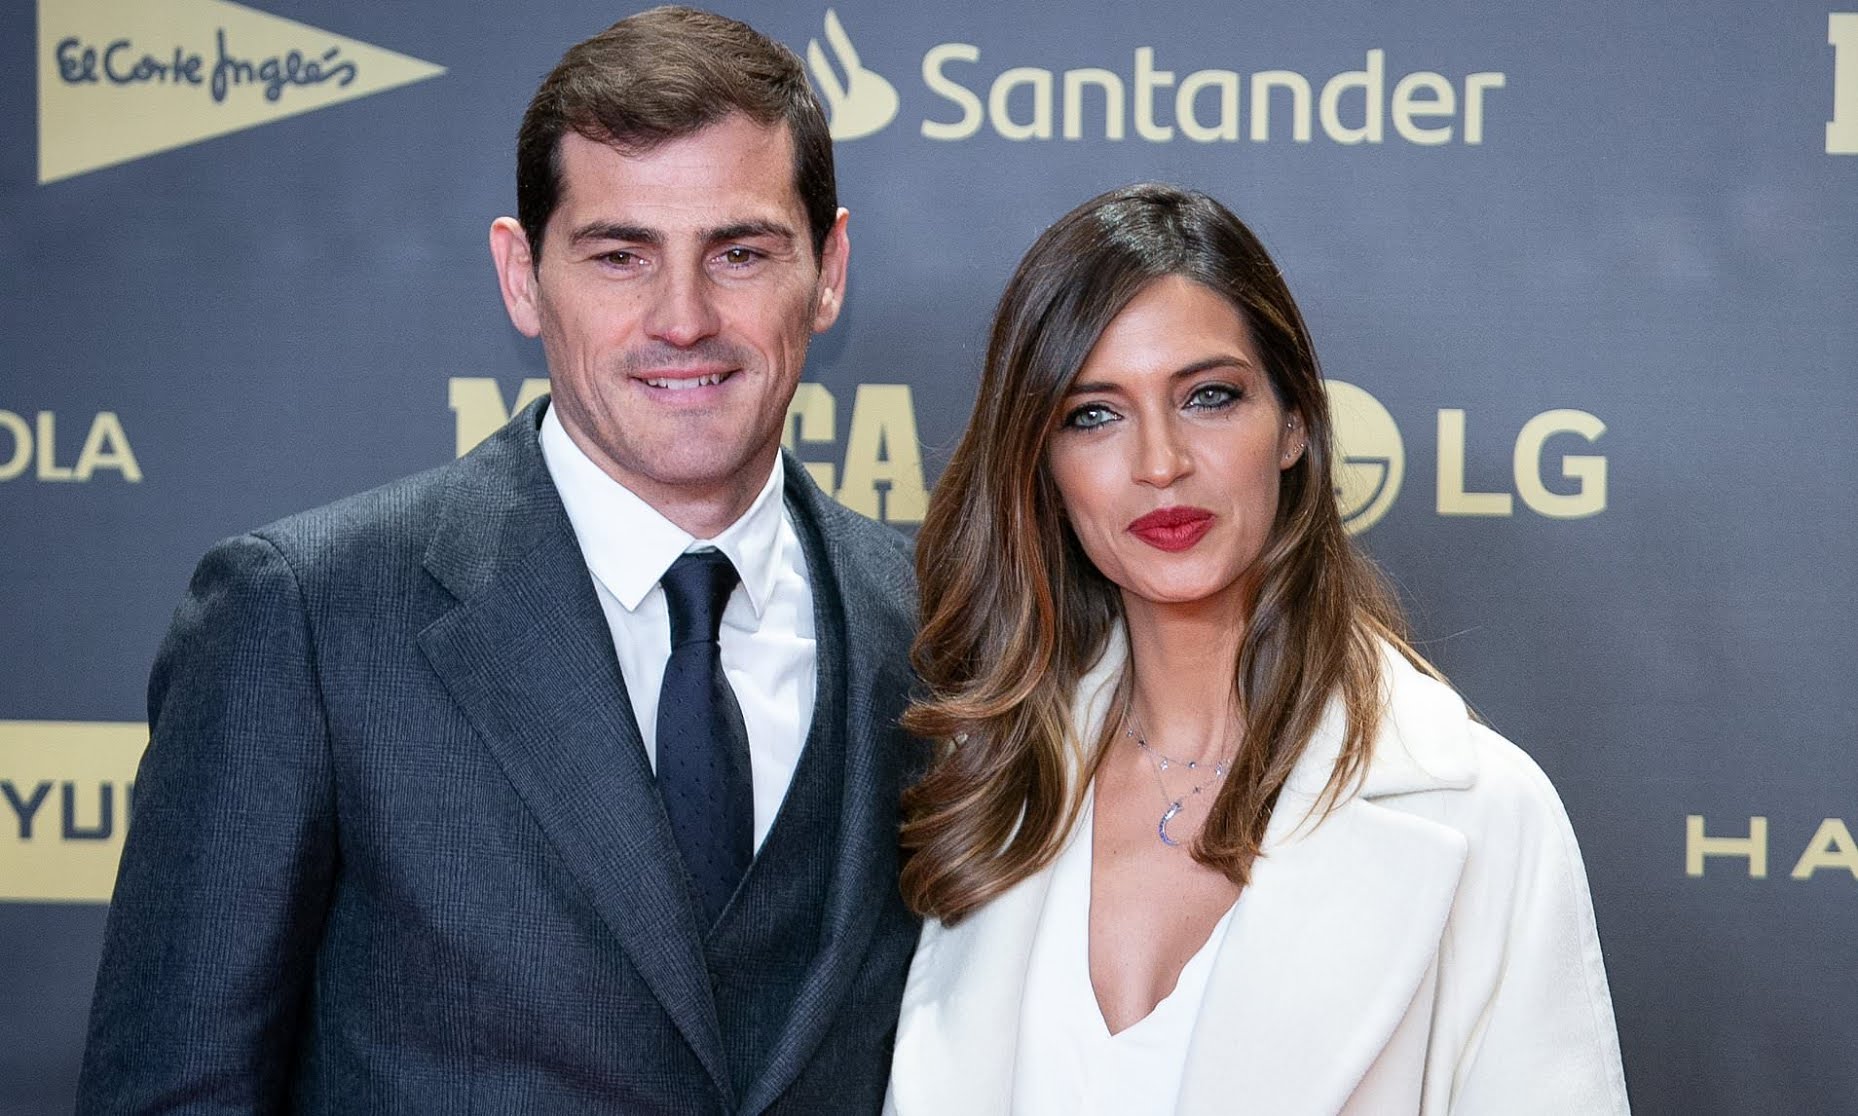 Real Madrid Legend Casillas Separates From Wife After 11 Years